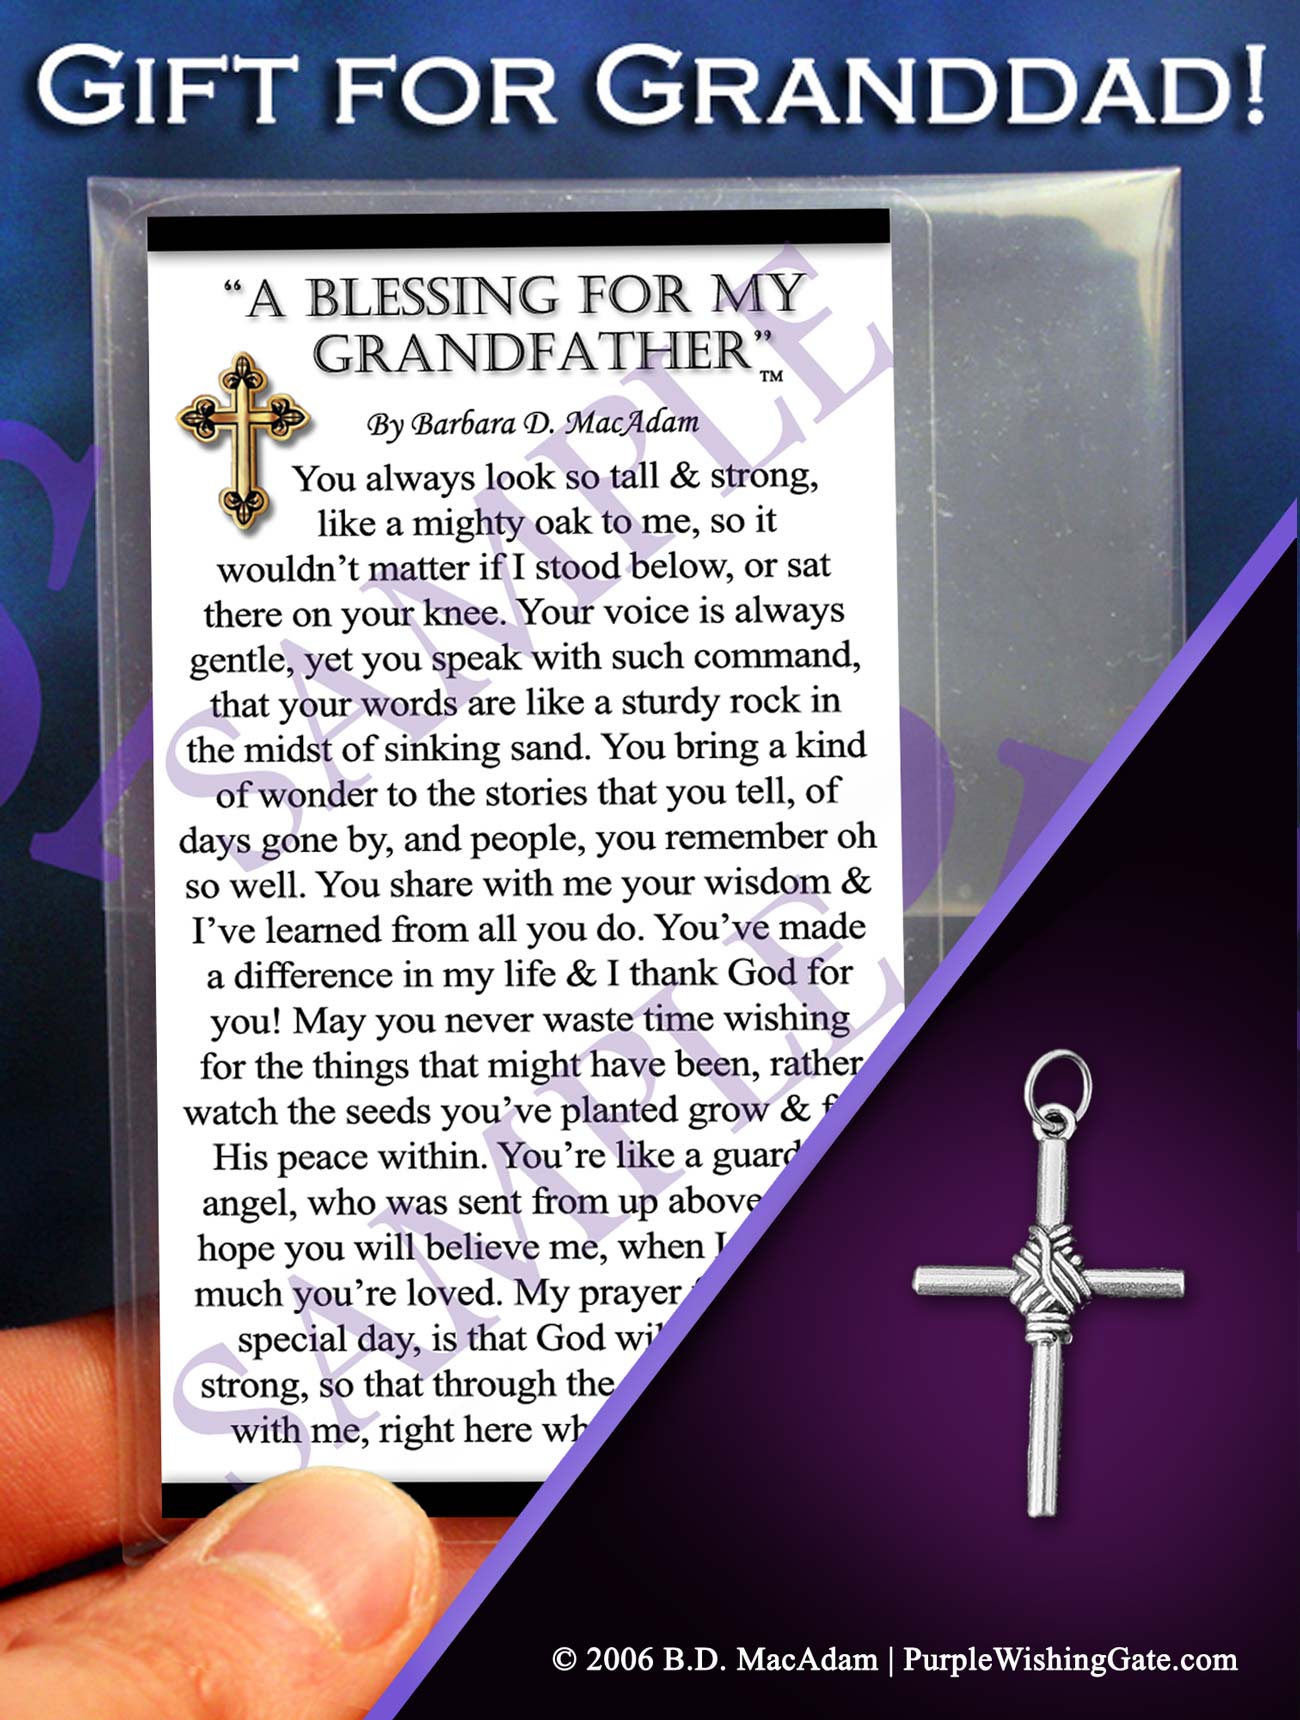 A Blessing for My Grandfather - Pocket Blessing | PurpleWishingGate.com